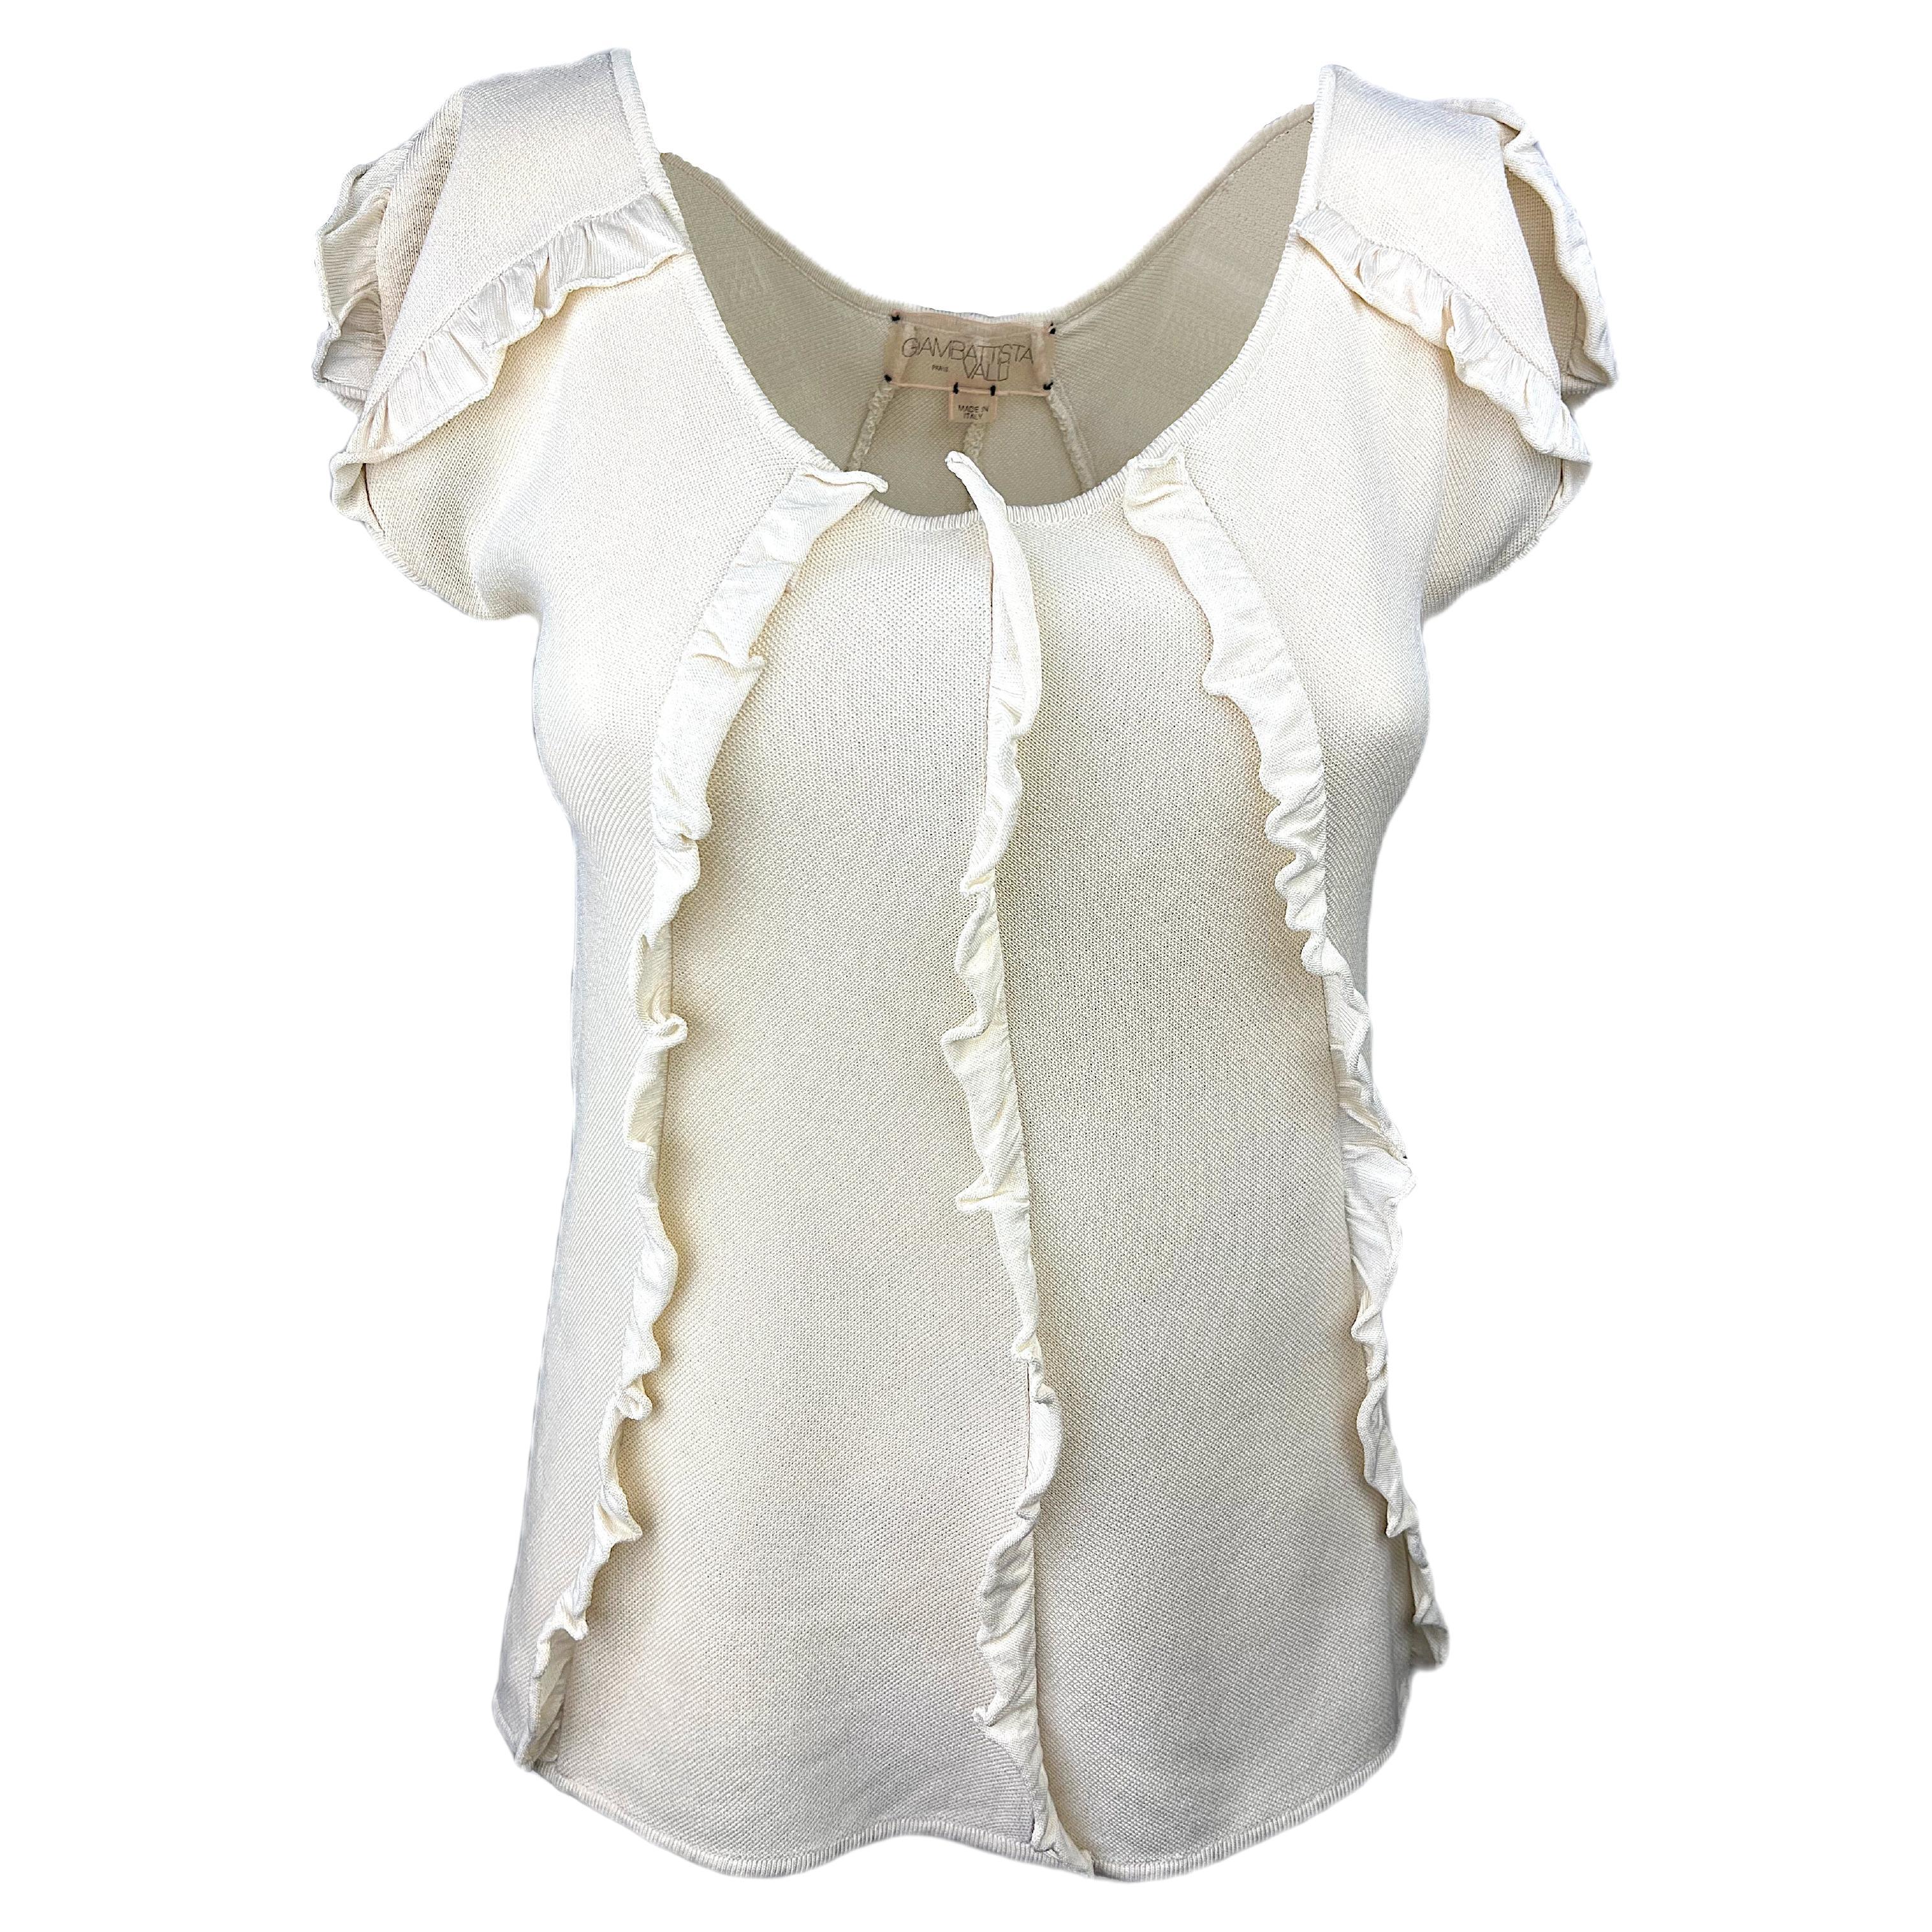 GIAMBATTISTA VALLI – Authentic Knitted Silk Top with Ruffles  Size 6US 38EU For Sale